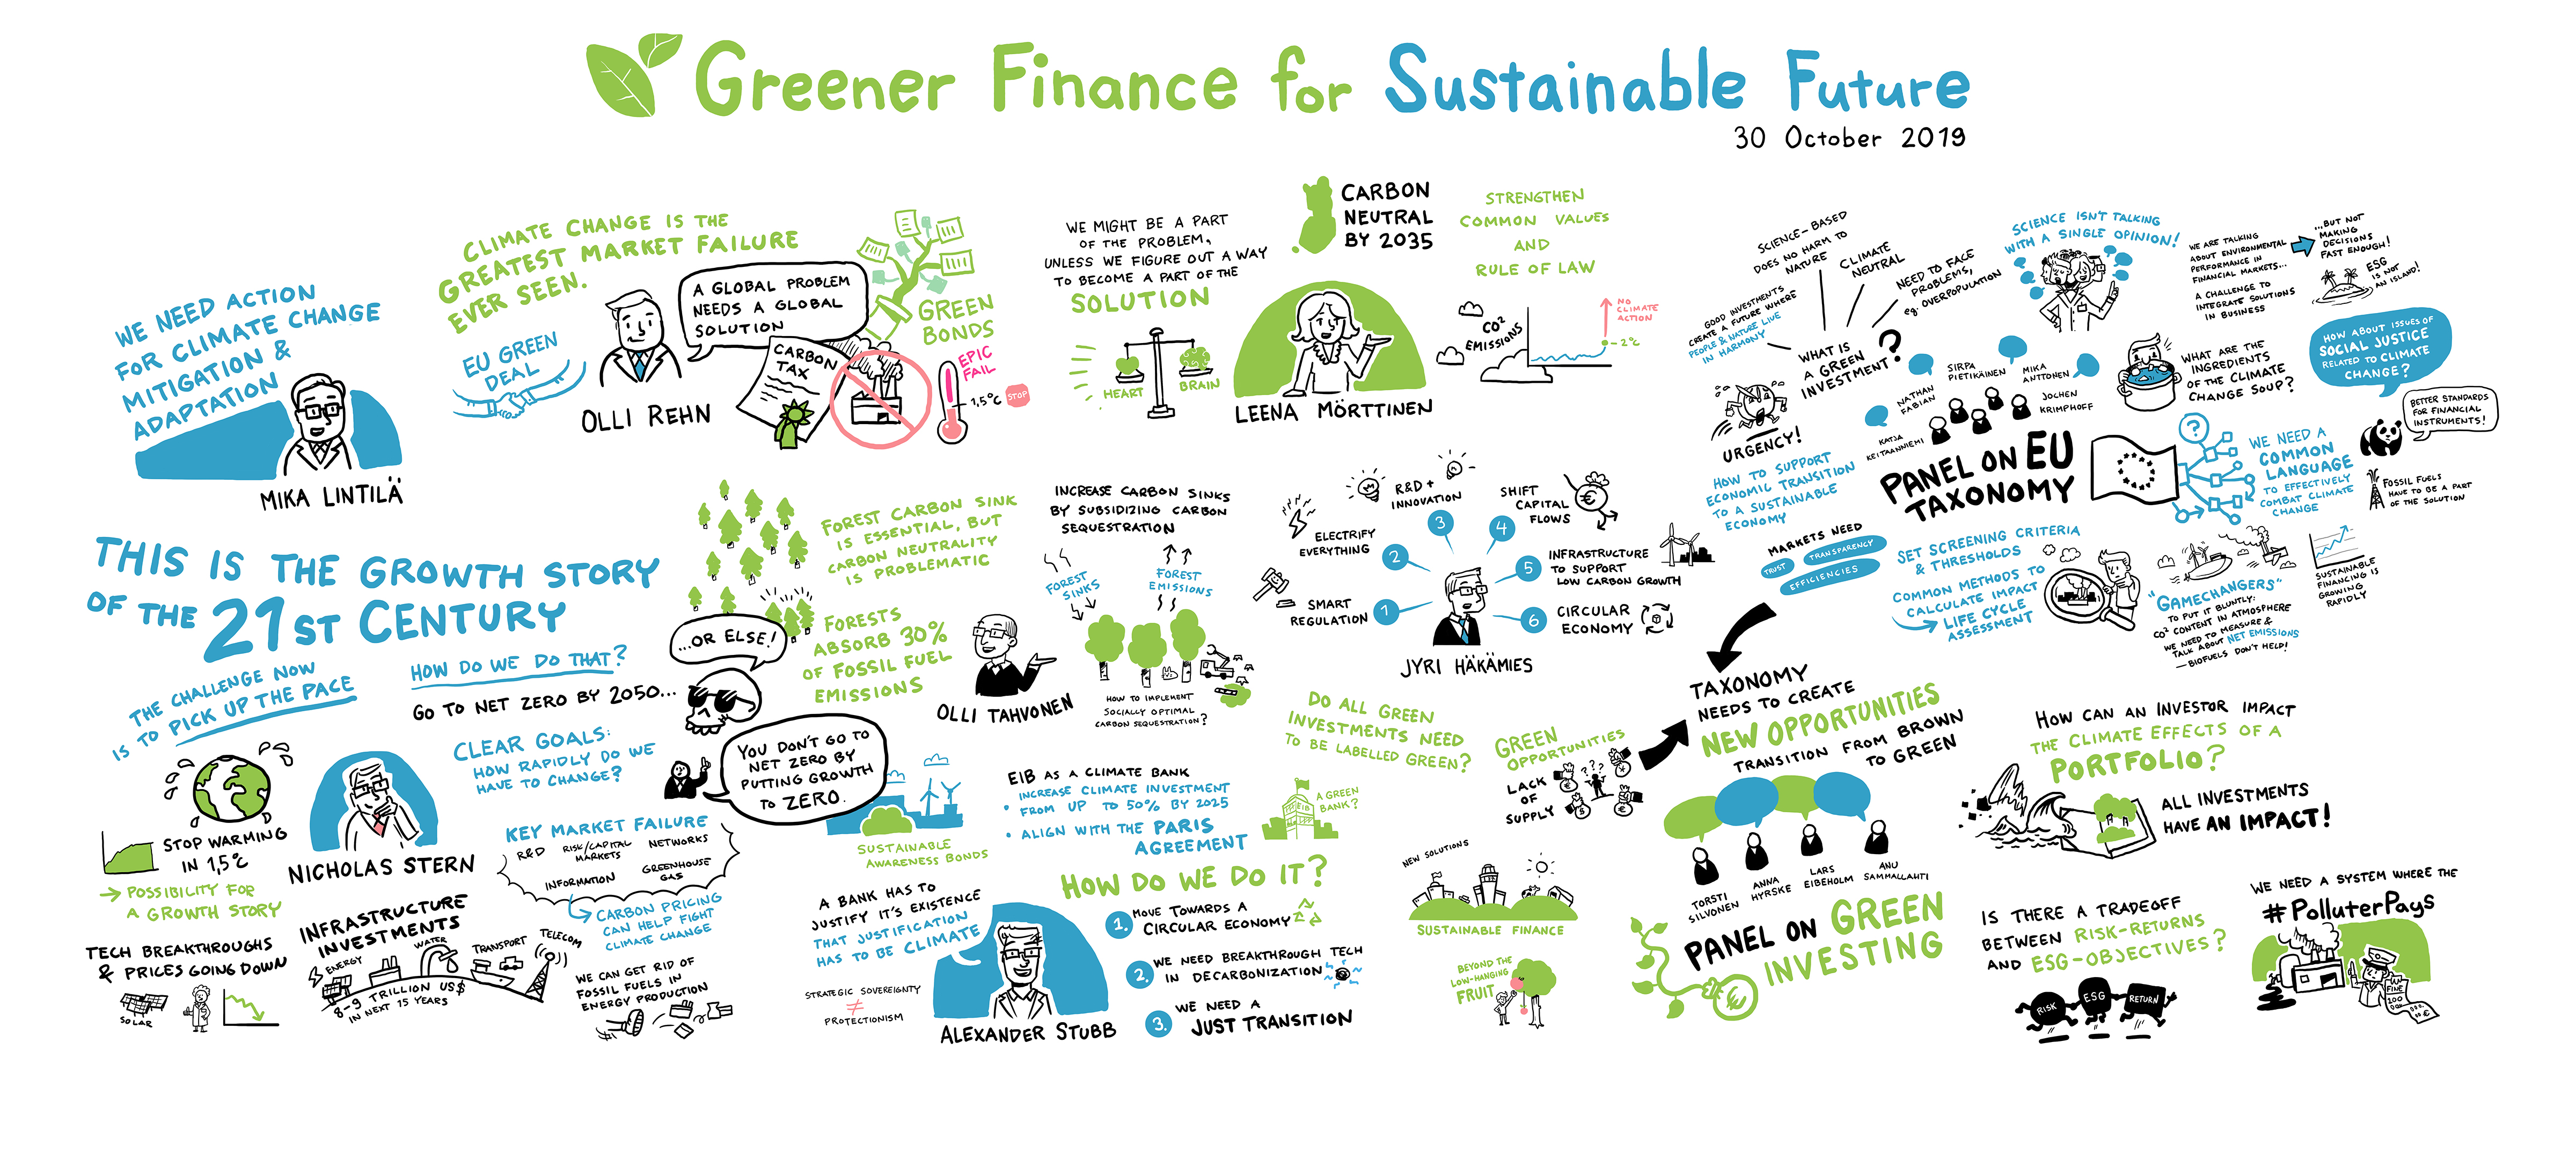 Drawing 1 Greener Finance for Sustainable Future seminar 2019